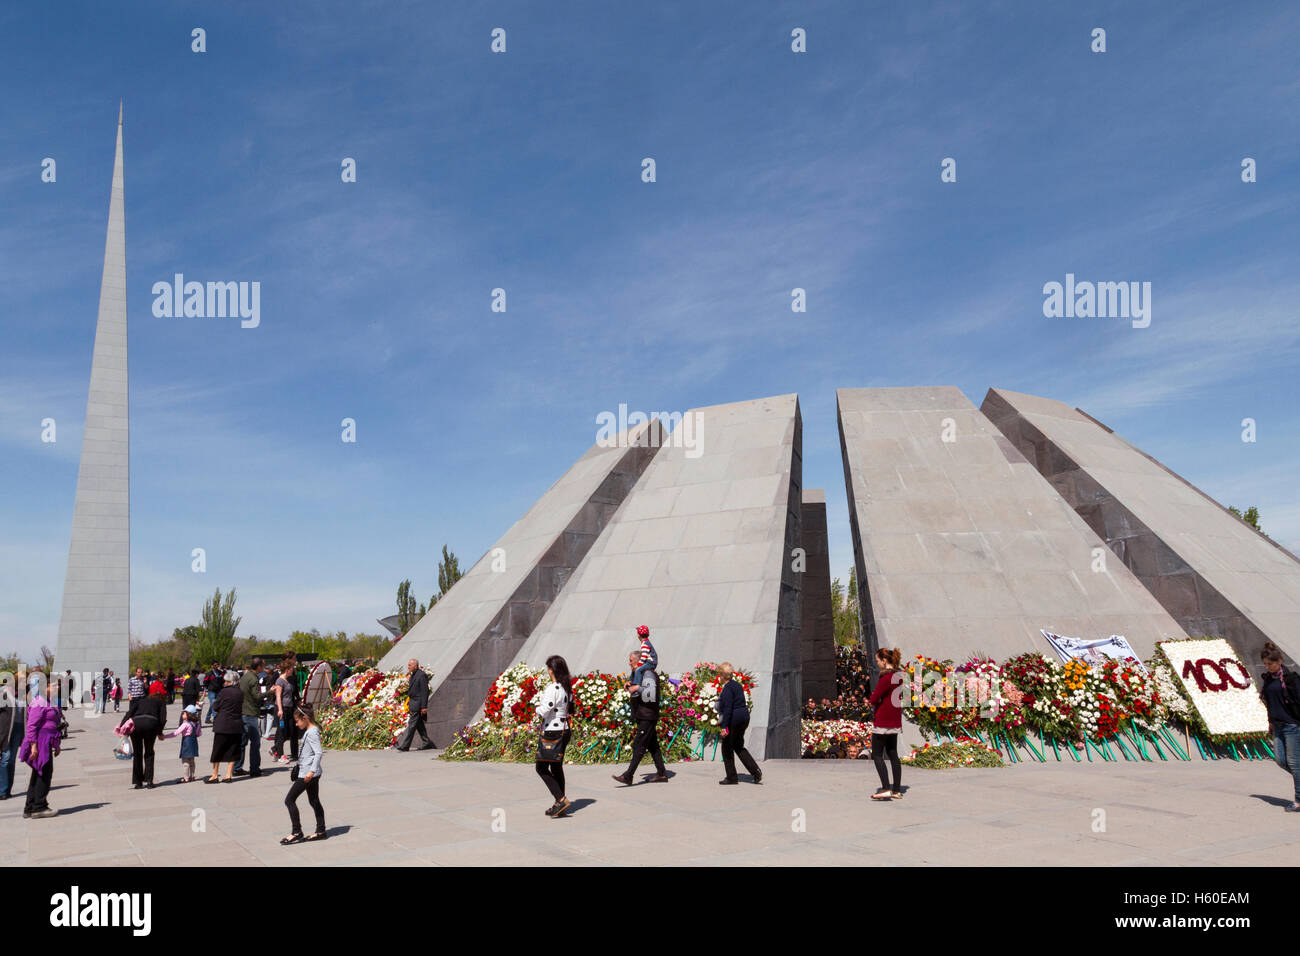 People visiting the genocide monument in Yerevan, Armenia at the centennial of the Armenian genocide in the year 2015. Stock Photo